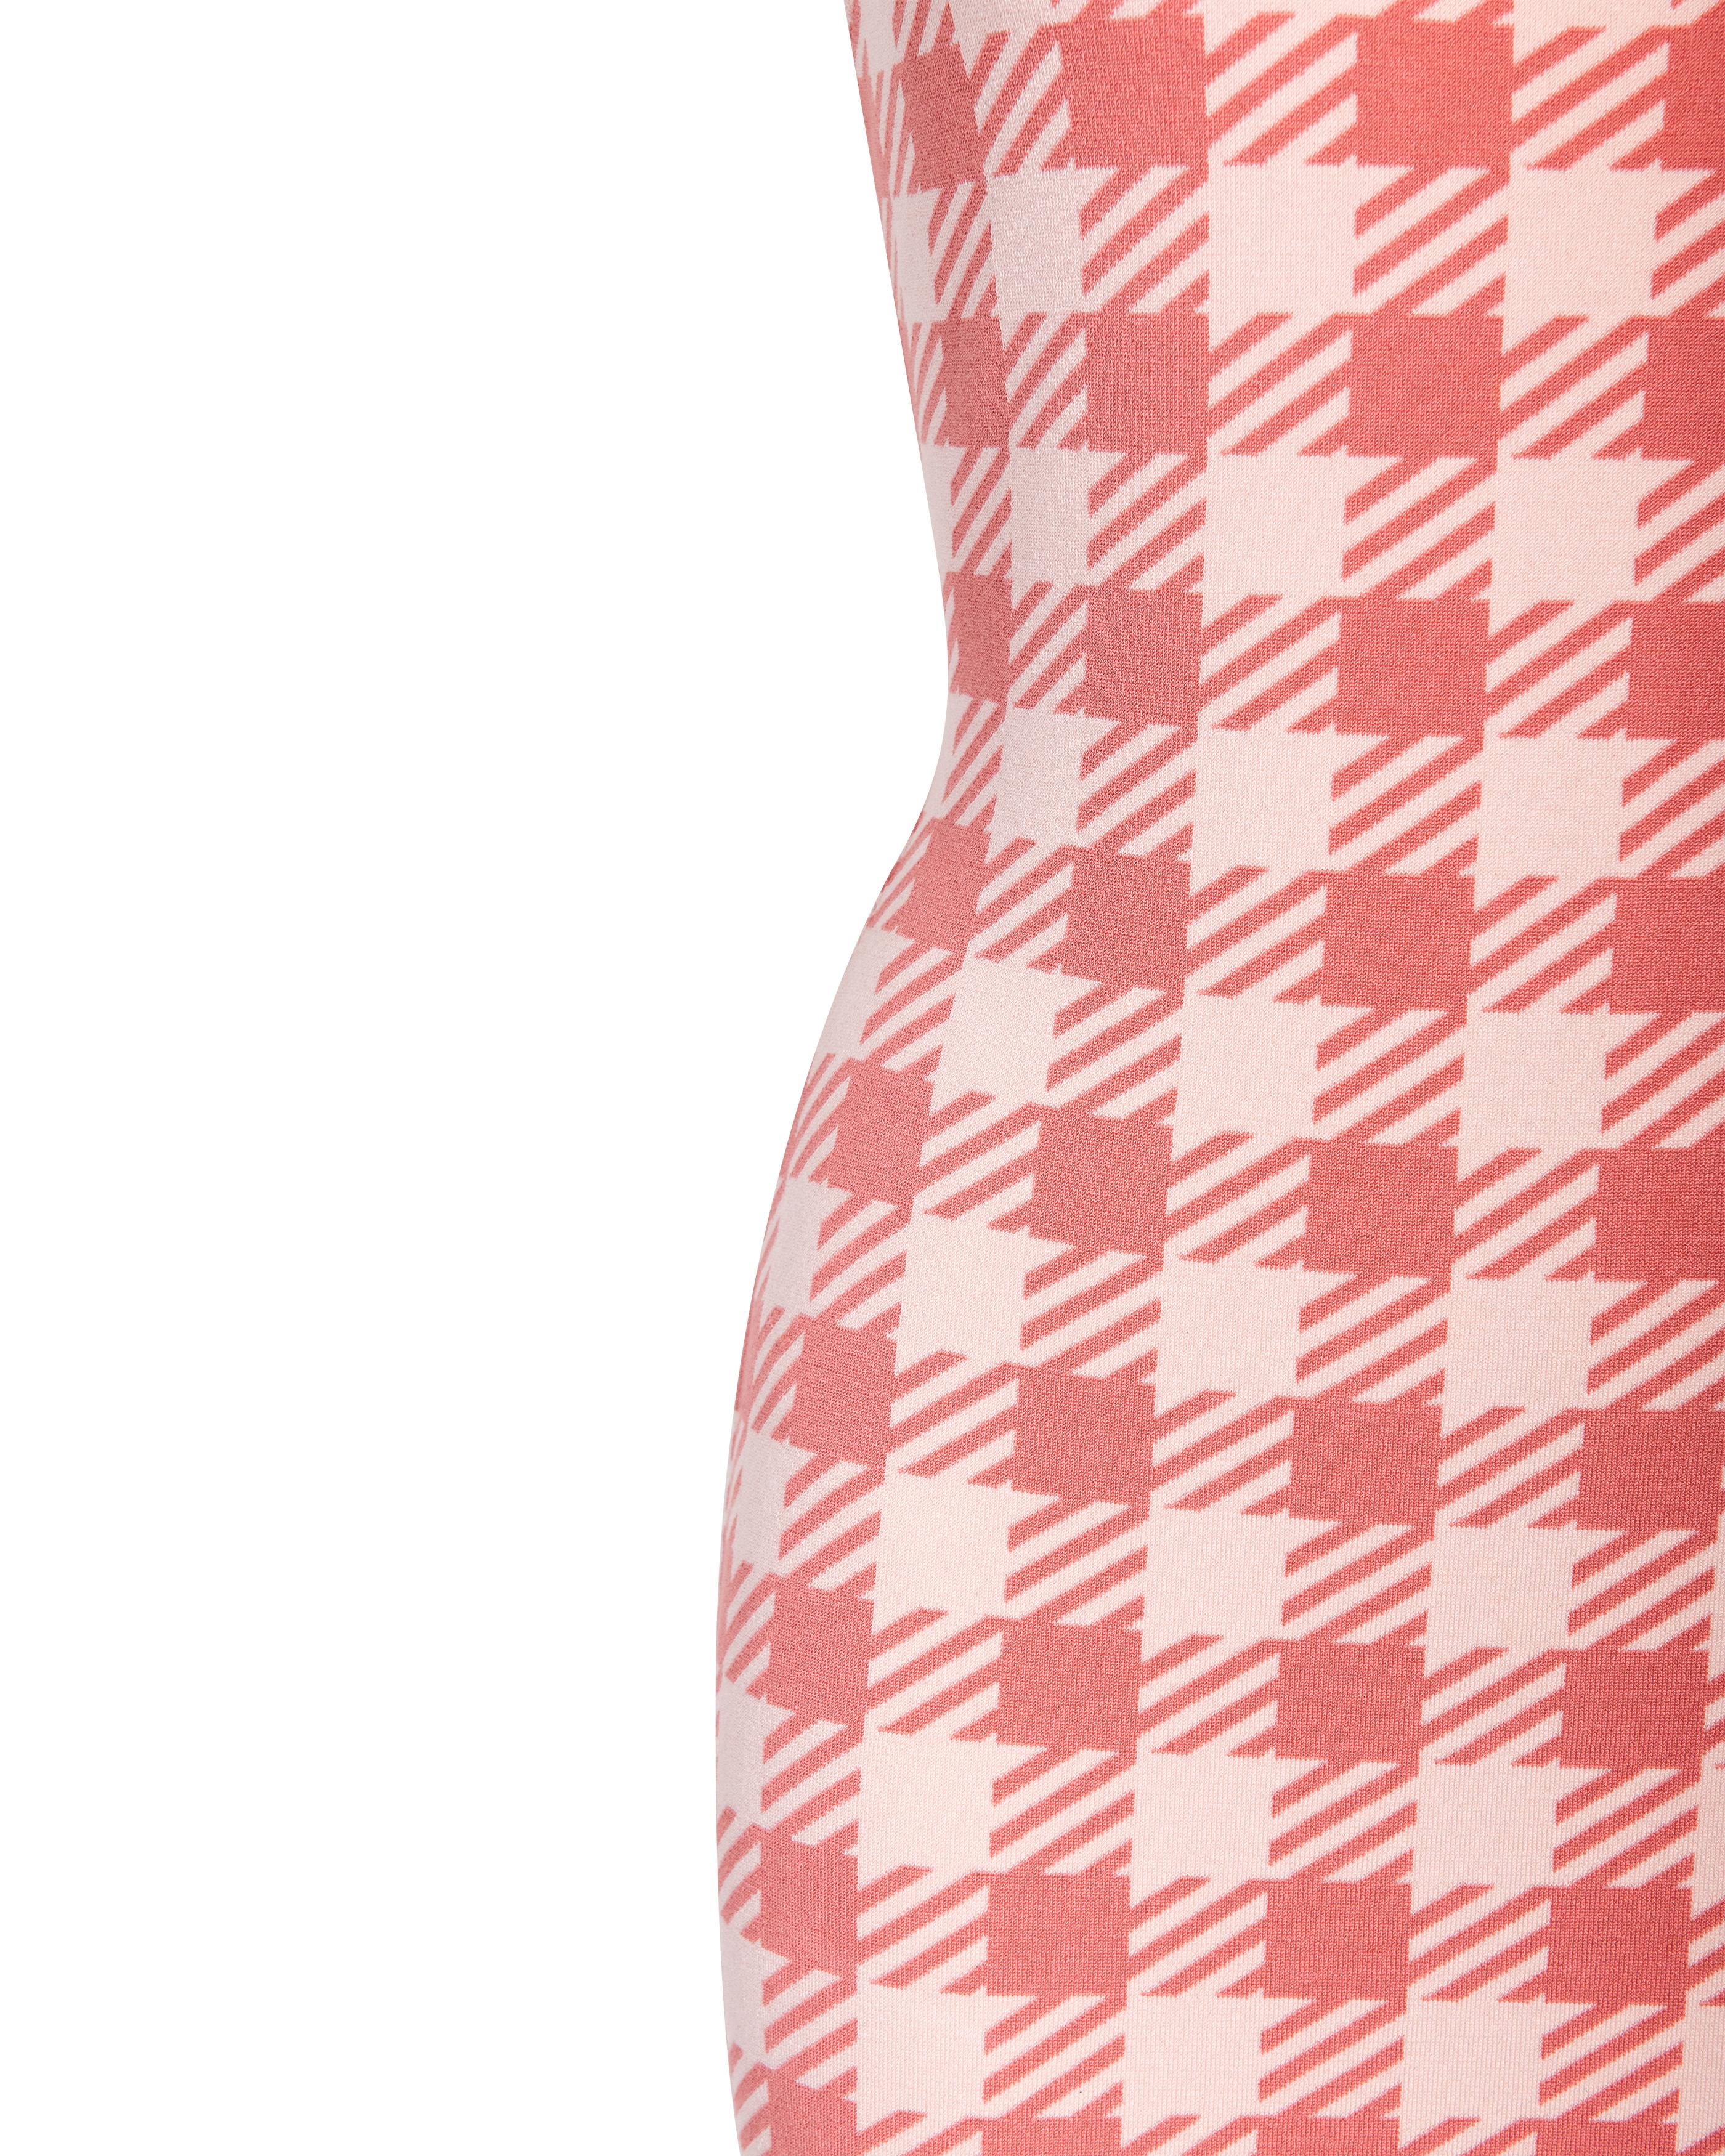 S/S 1991 Azzedine Alaïa ‘Tati’ Houndstooth Peach Mini Dress In Excellent Condition In North Hollywood, CA